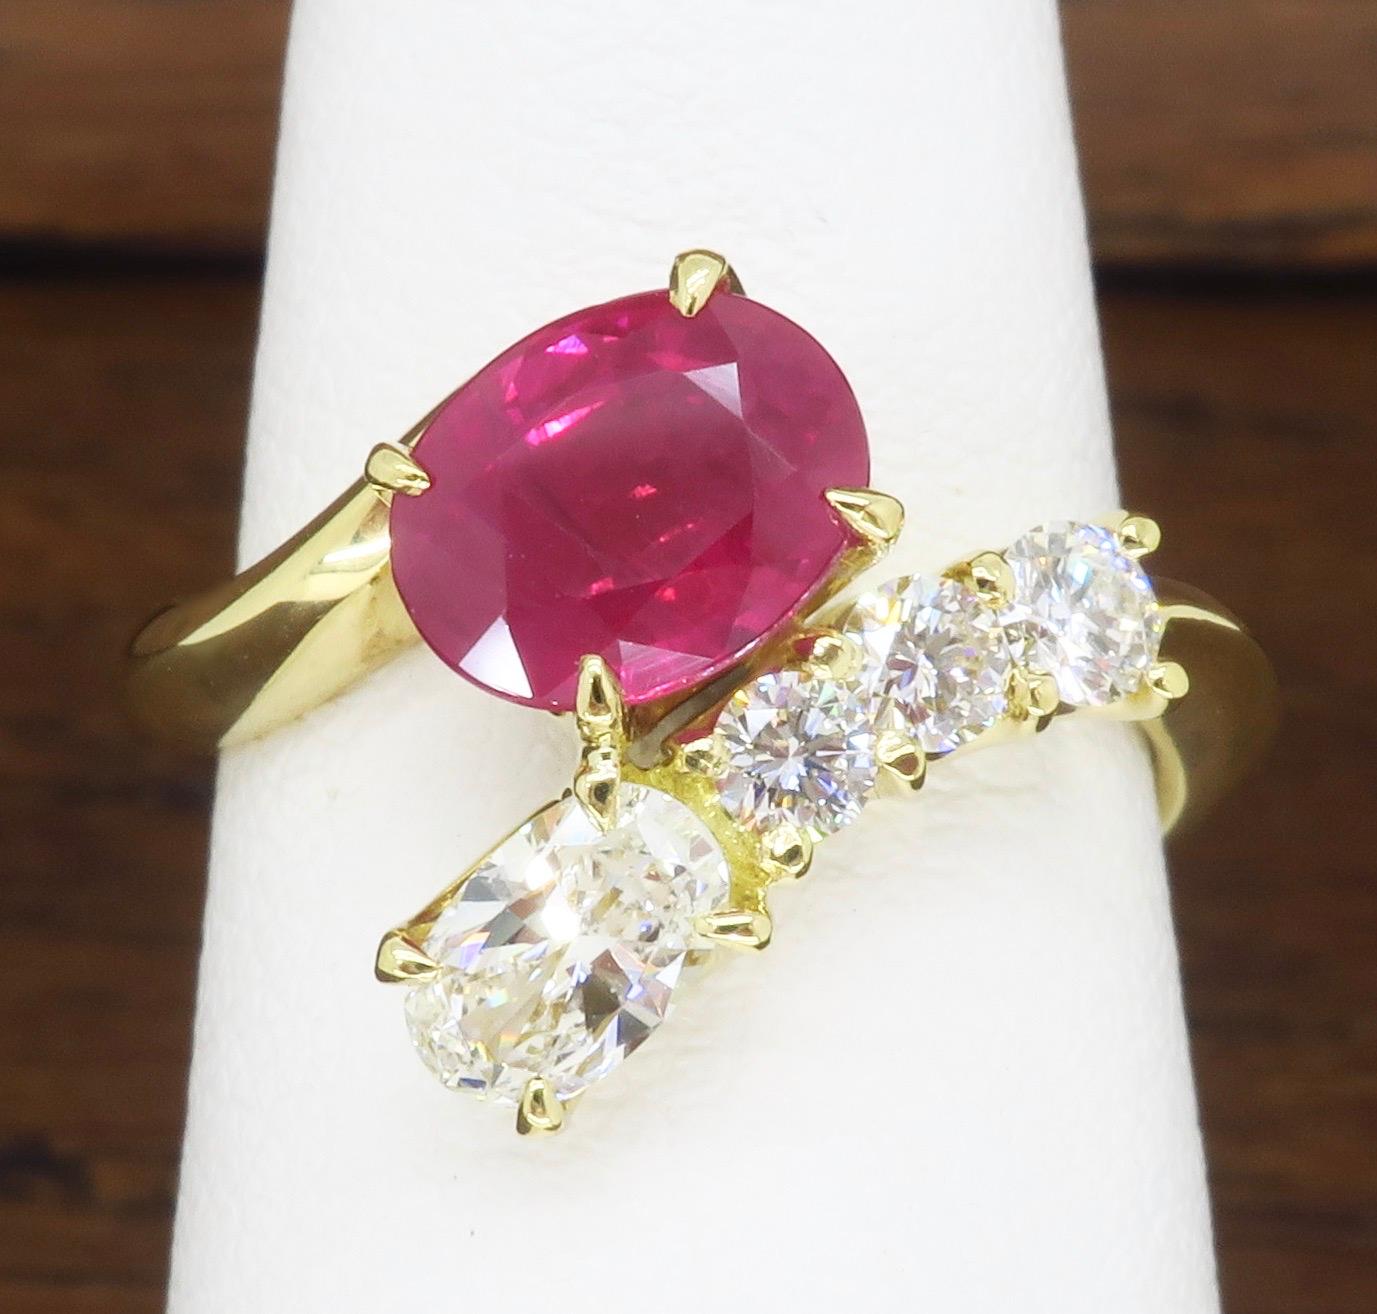 Oval Ruby & Diamond bypass ring made in 18k yellow gold. 

Gemstone: Oval Ruby & Diamond
Gemstone Carat Weight:  1.35CT  Ruby
Diamond Carat Weight:  .46CTW
Diamond Cut: Round Brilliant Cut 
Color: Average F-G
Clarity: Average VS
Metal: 18k Yellow